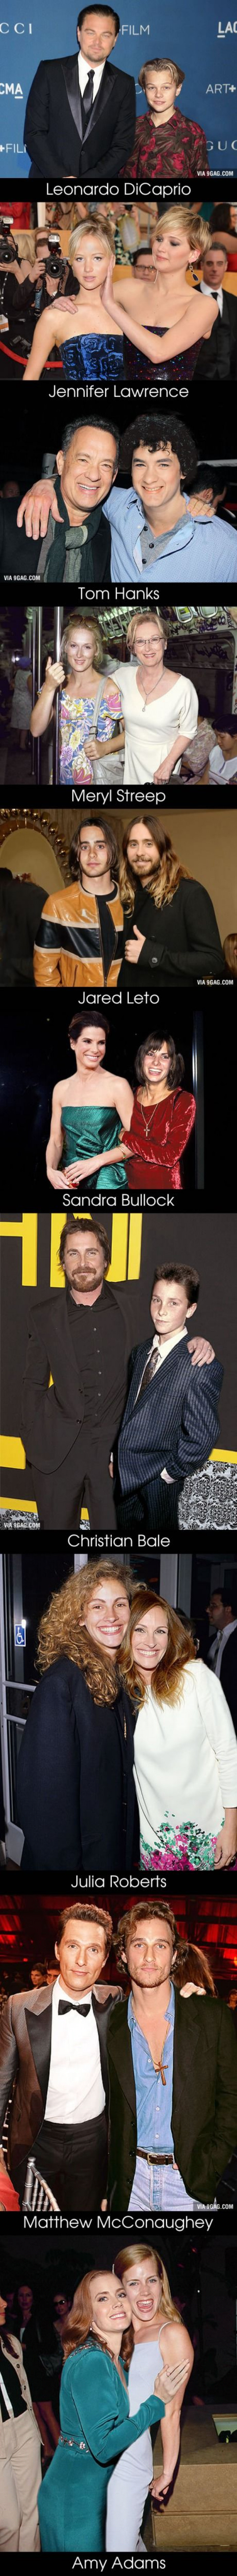 10 Oscar Nominees Posing With Their Younger Selves